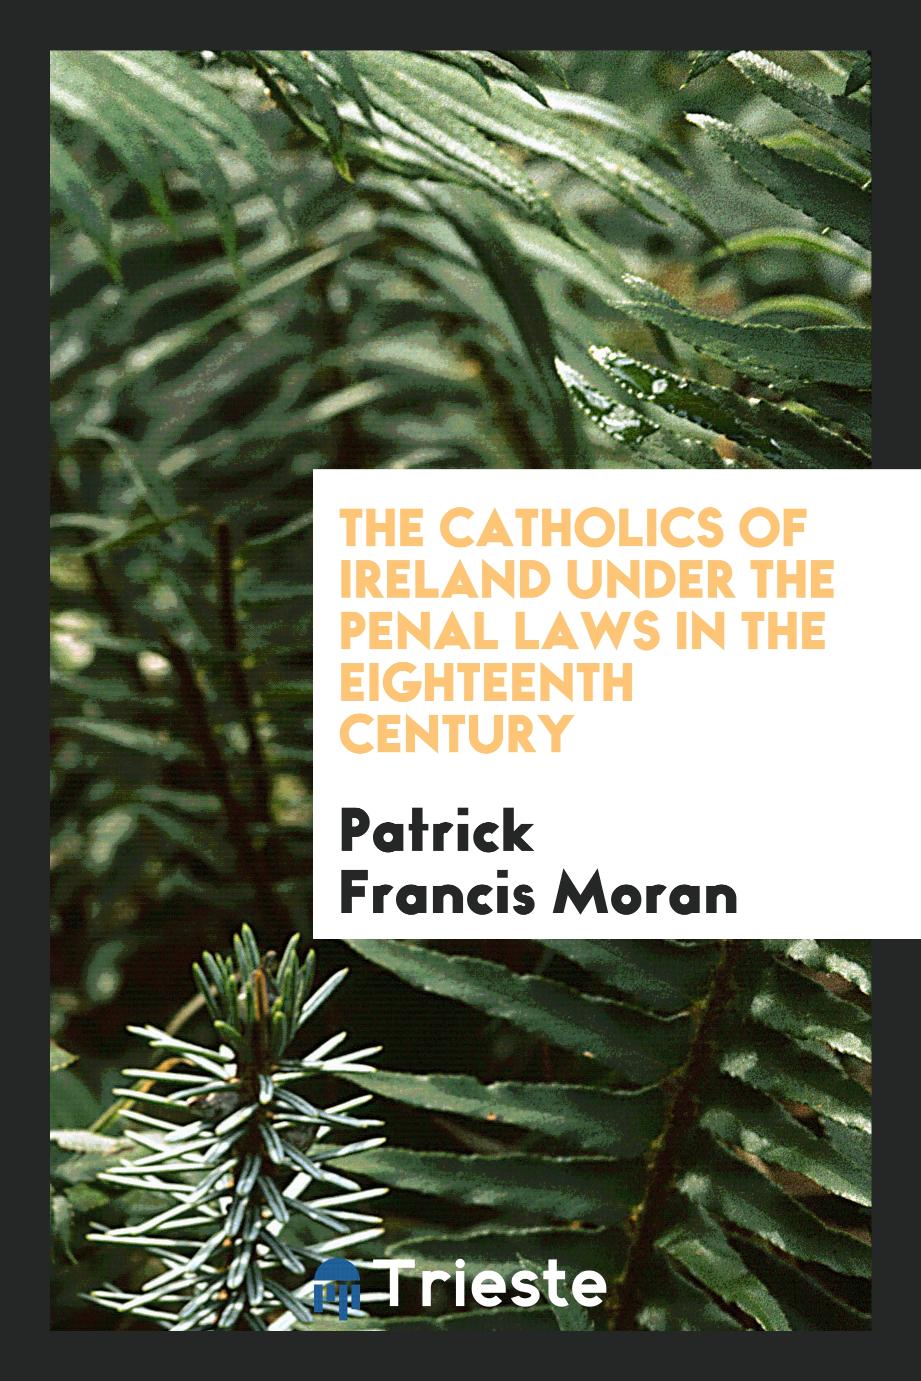 The Catholics of Ireland under the Penal Laws in the Eighteenth Century